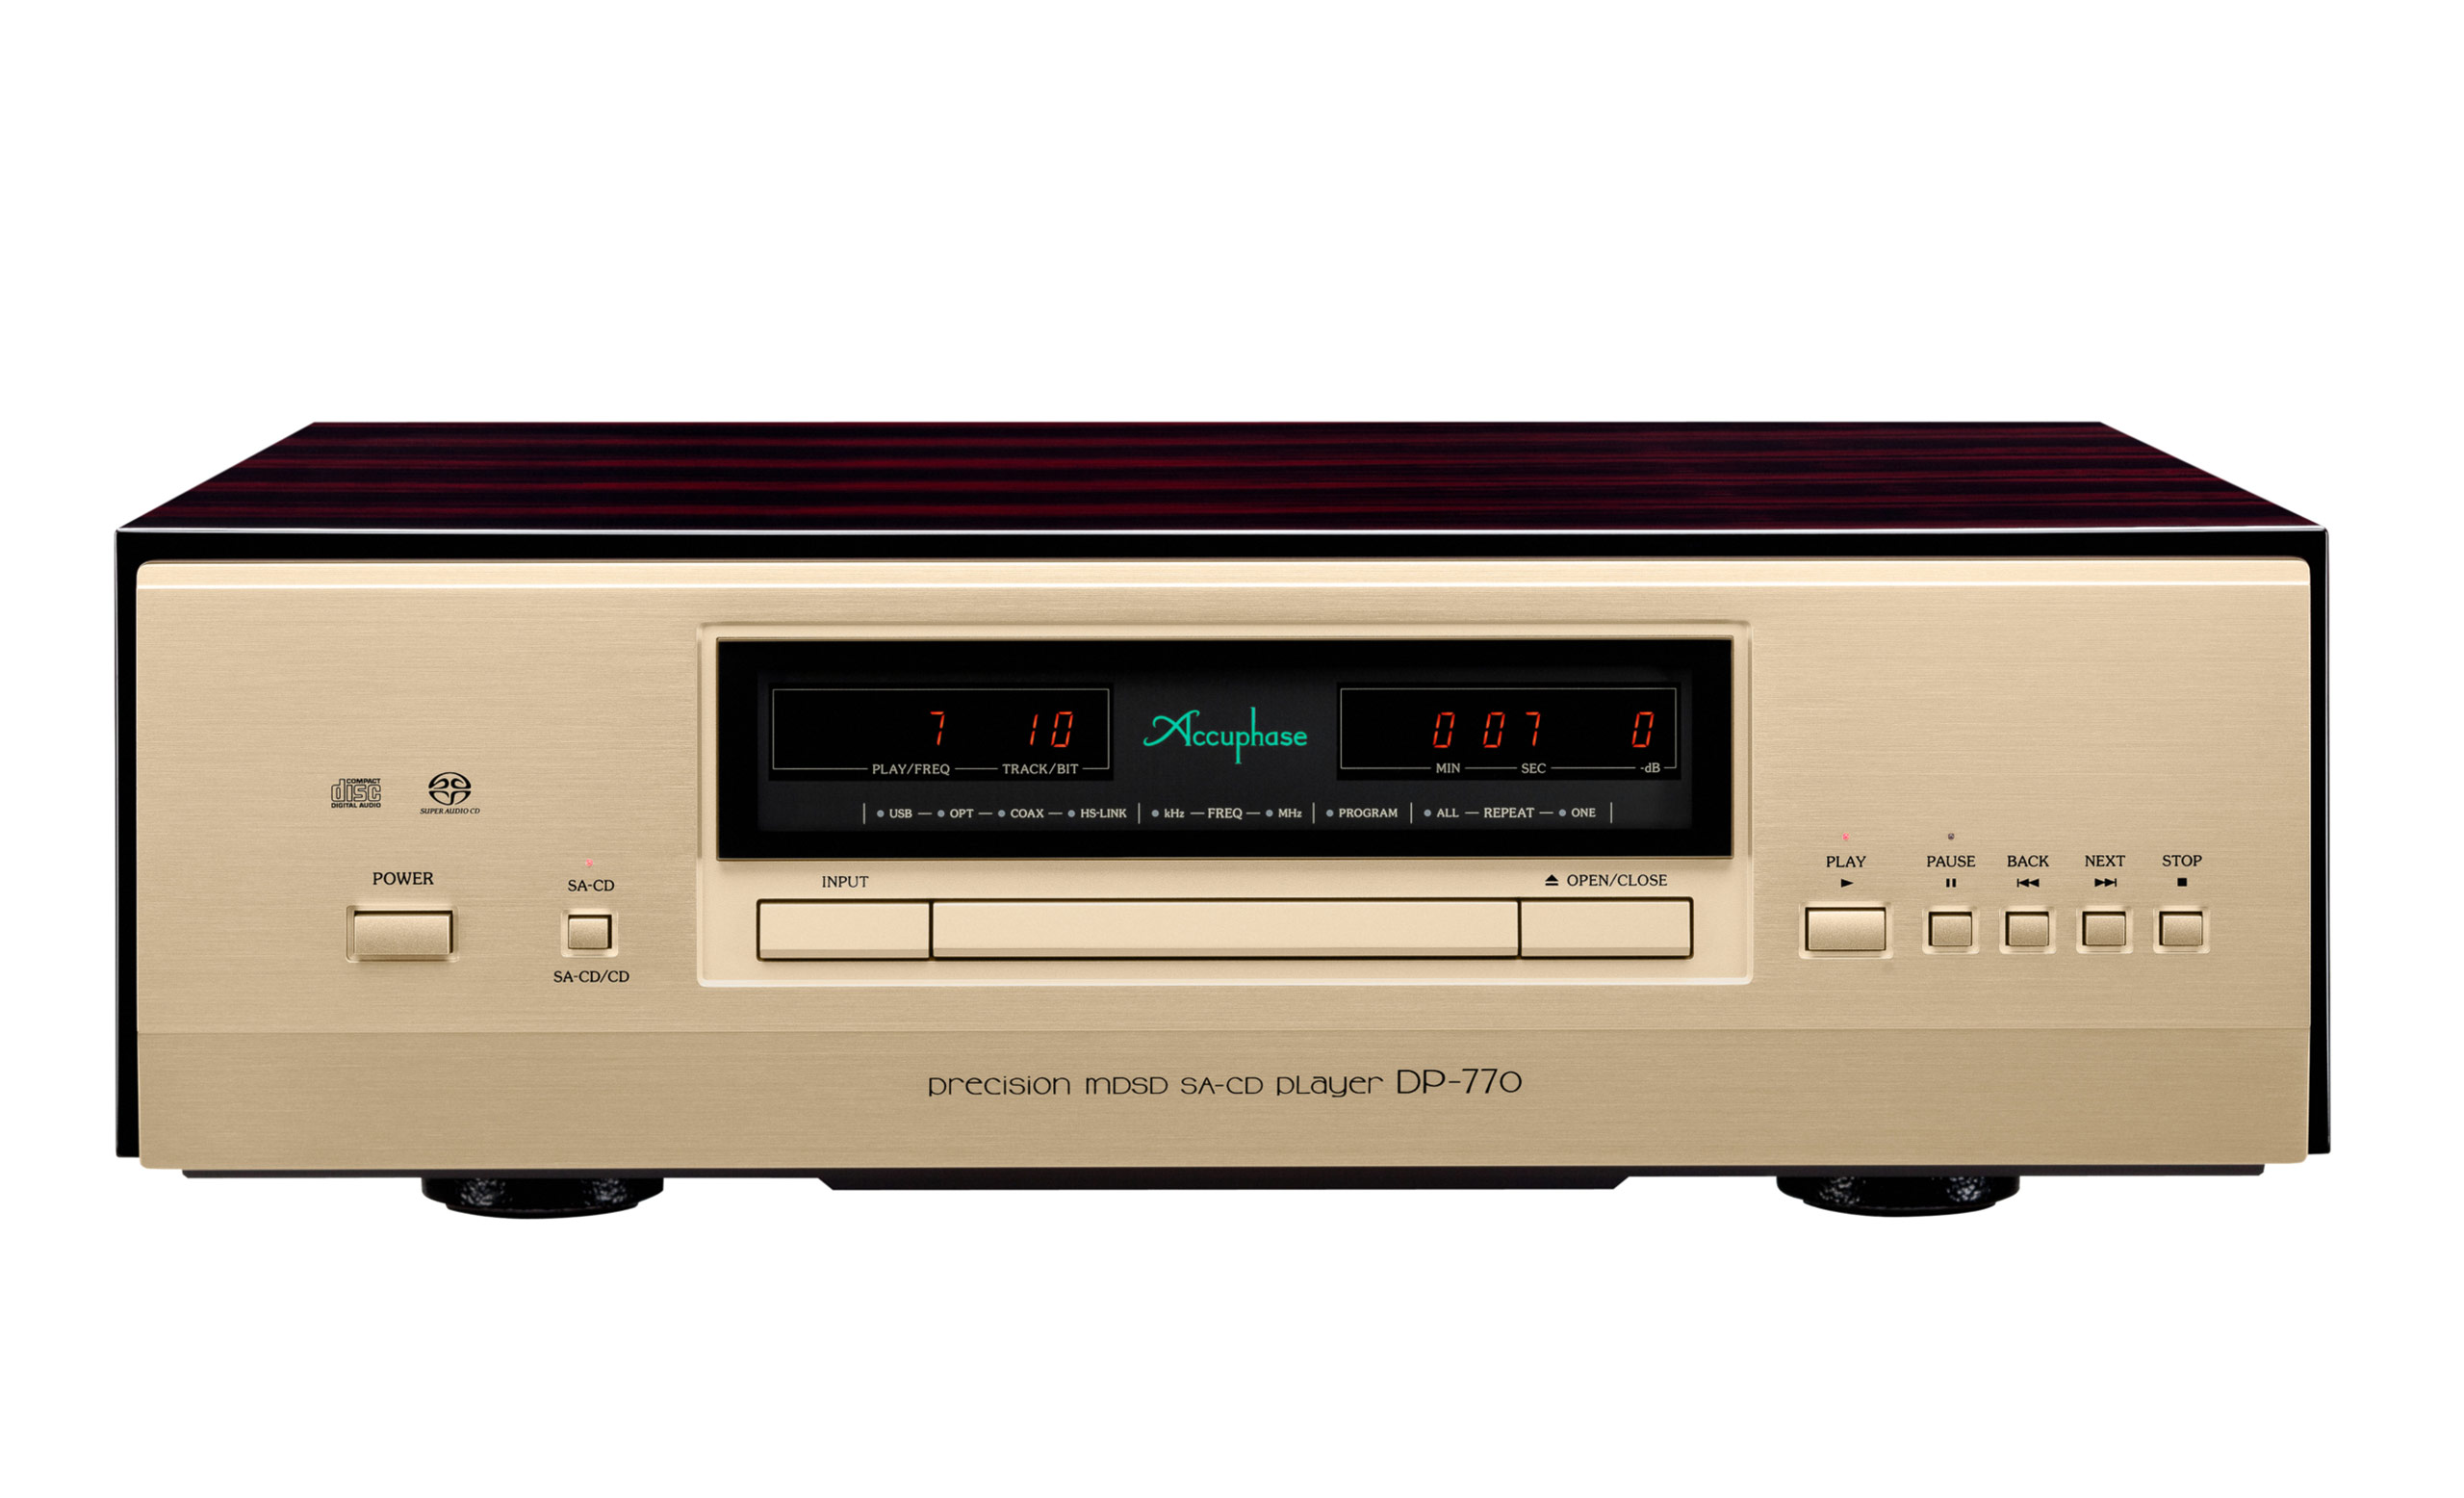 Accuphase DP-770 SACD/CD-Spieler